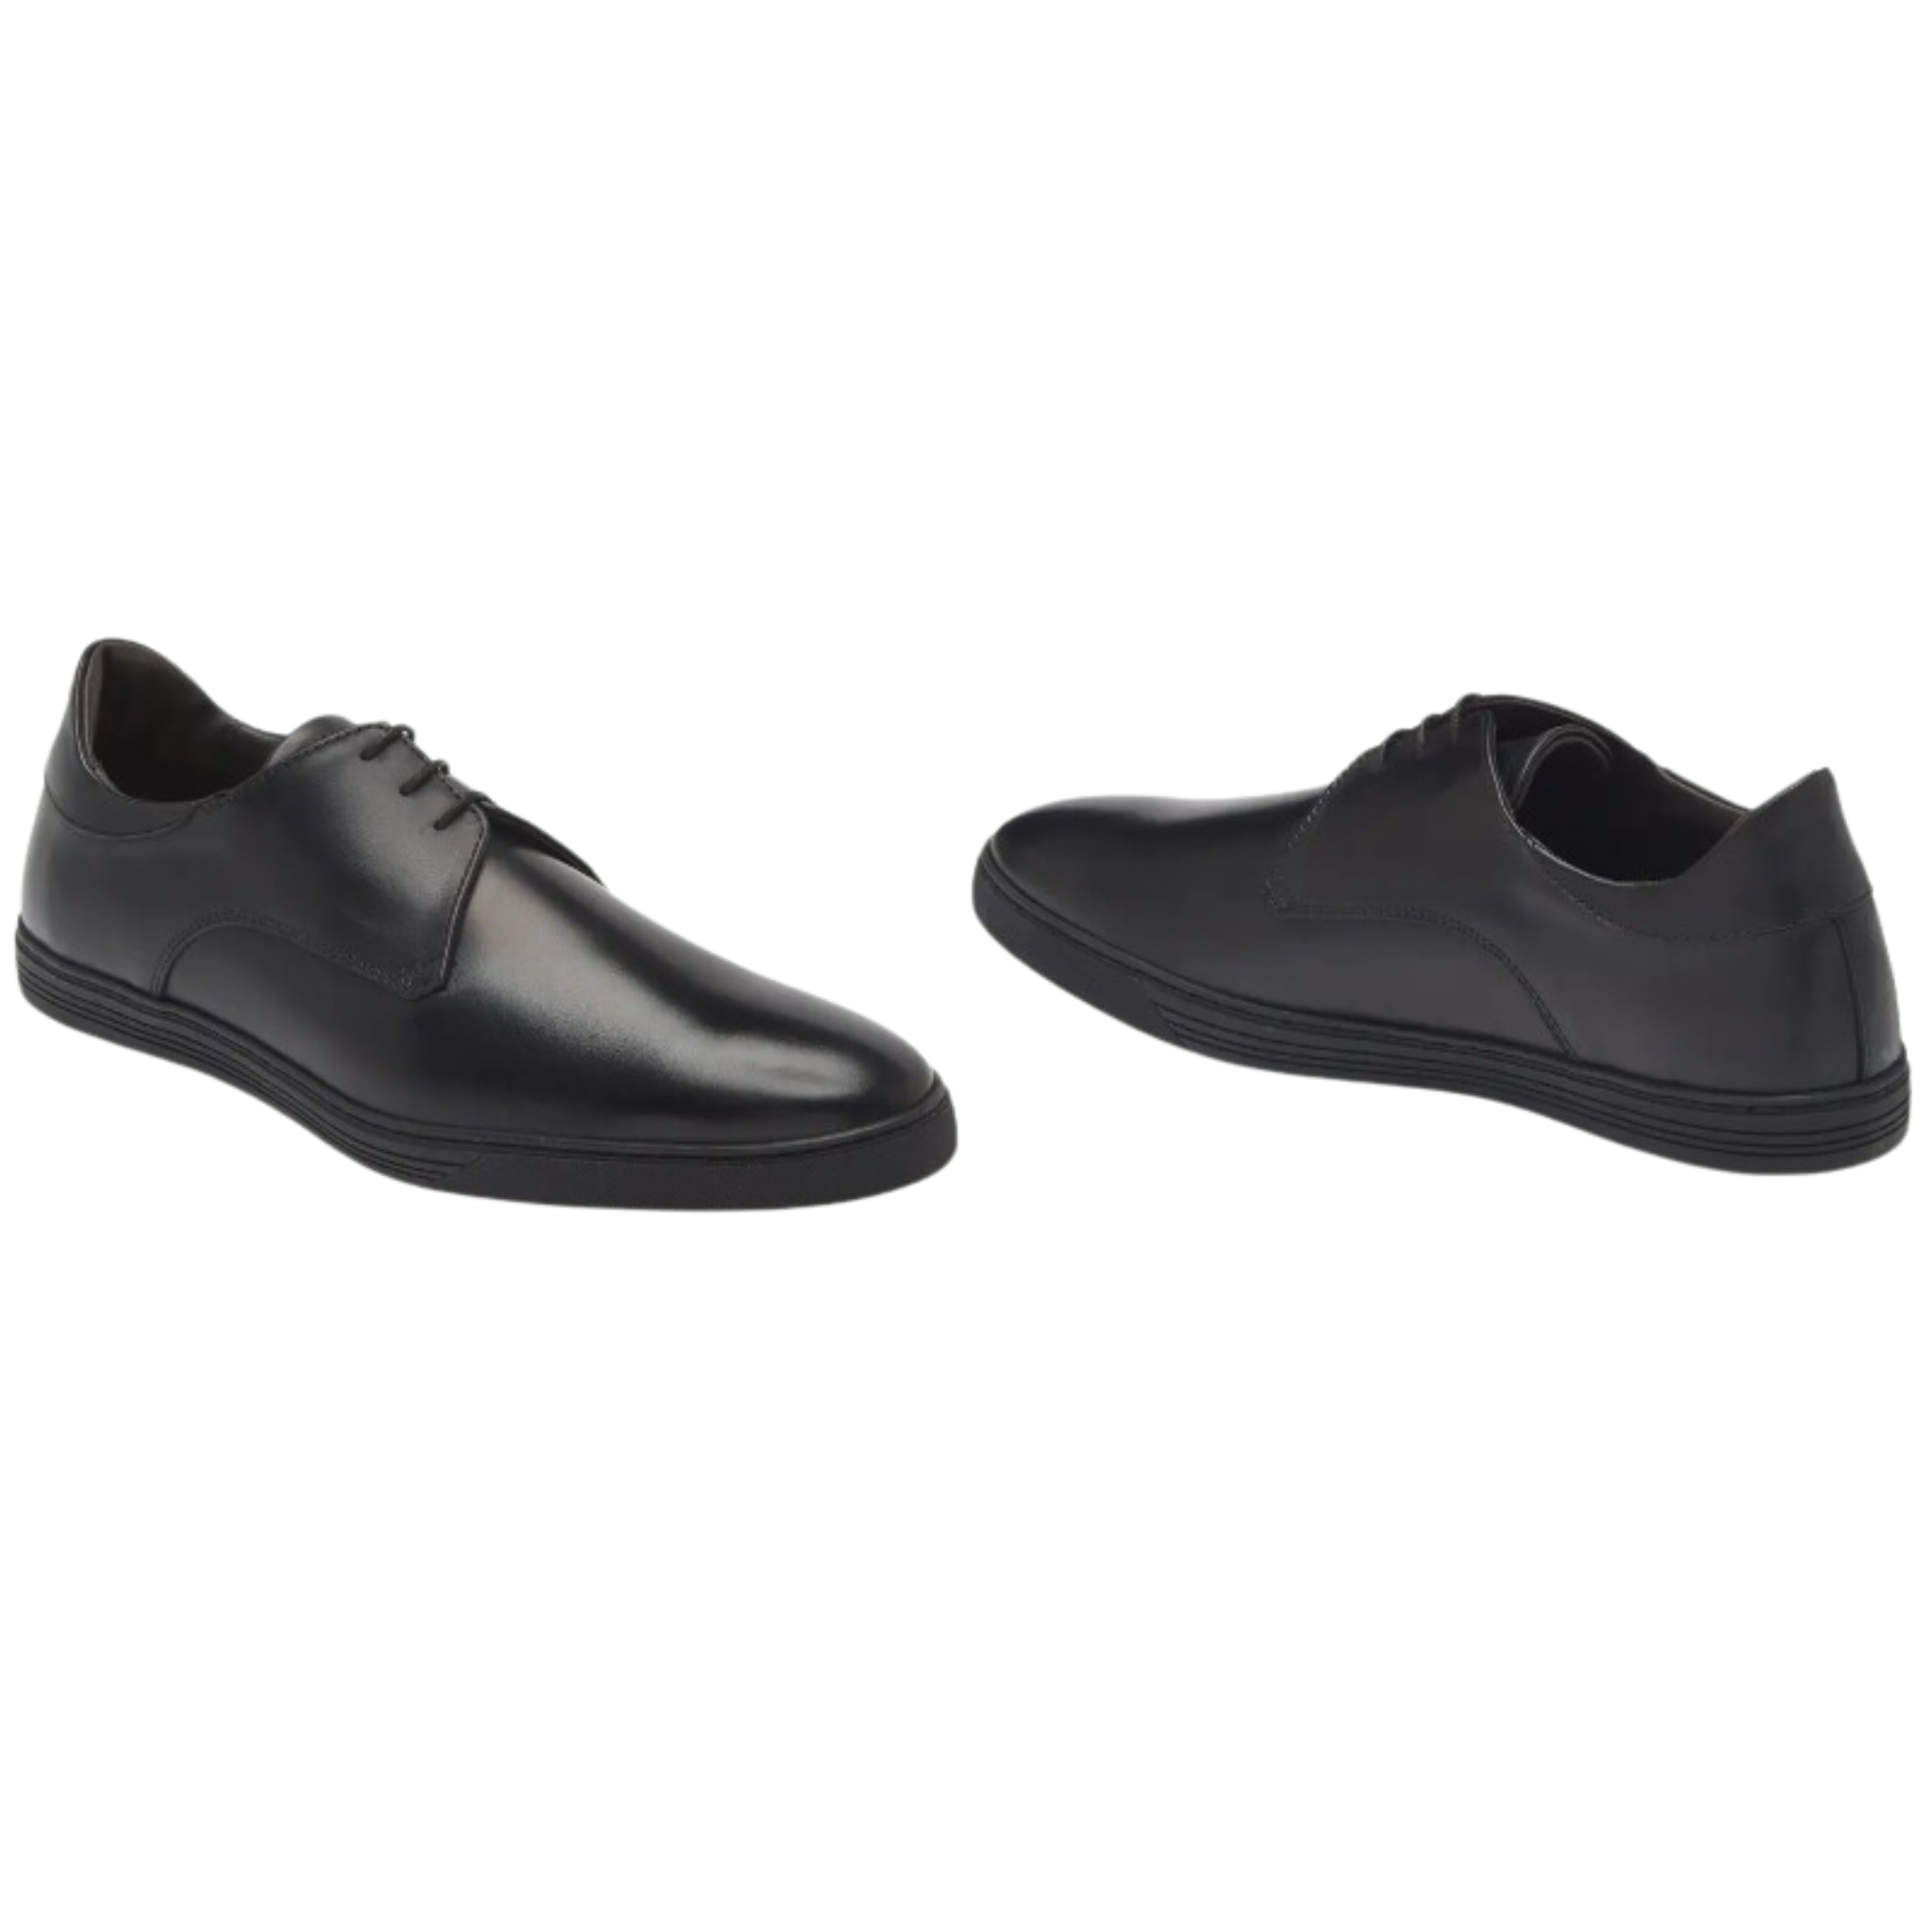 Save Up To 70% on Bruno Magli Men’s Shoes